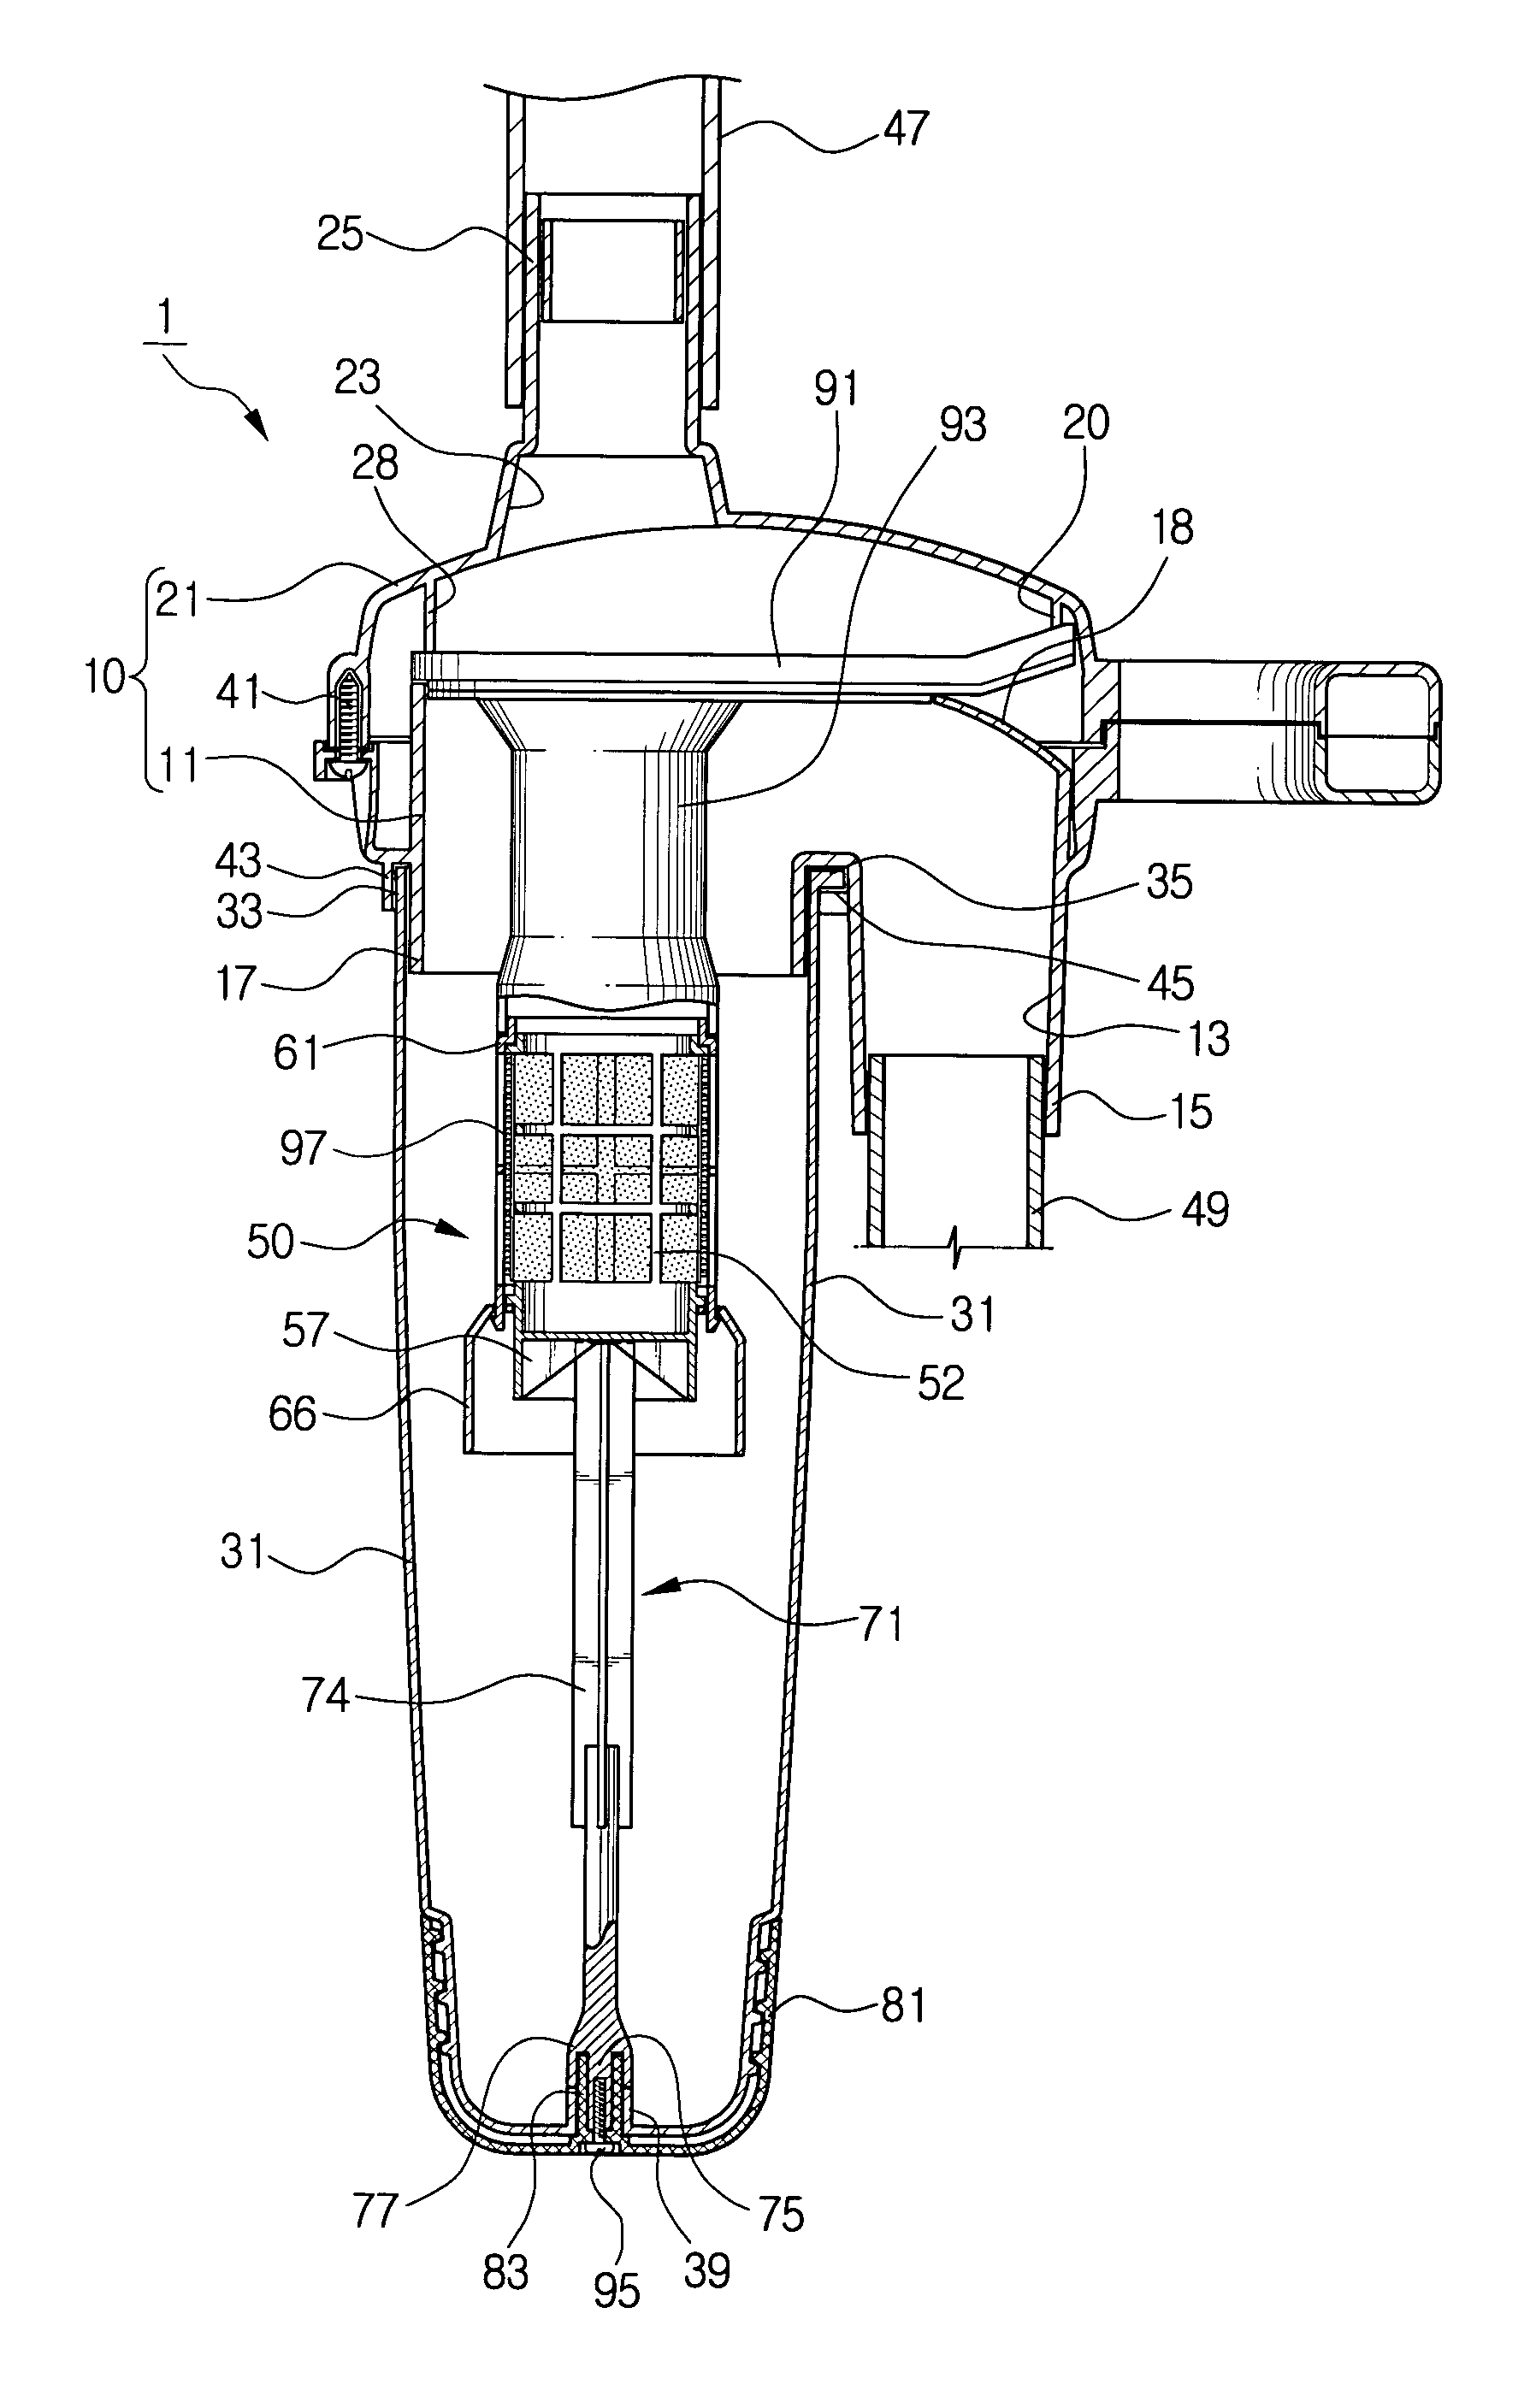 Filter assembly for a cyclone-type dust collecting apparatus of vacuum cleaner